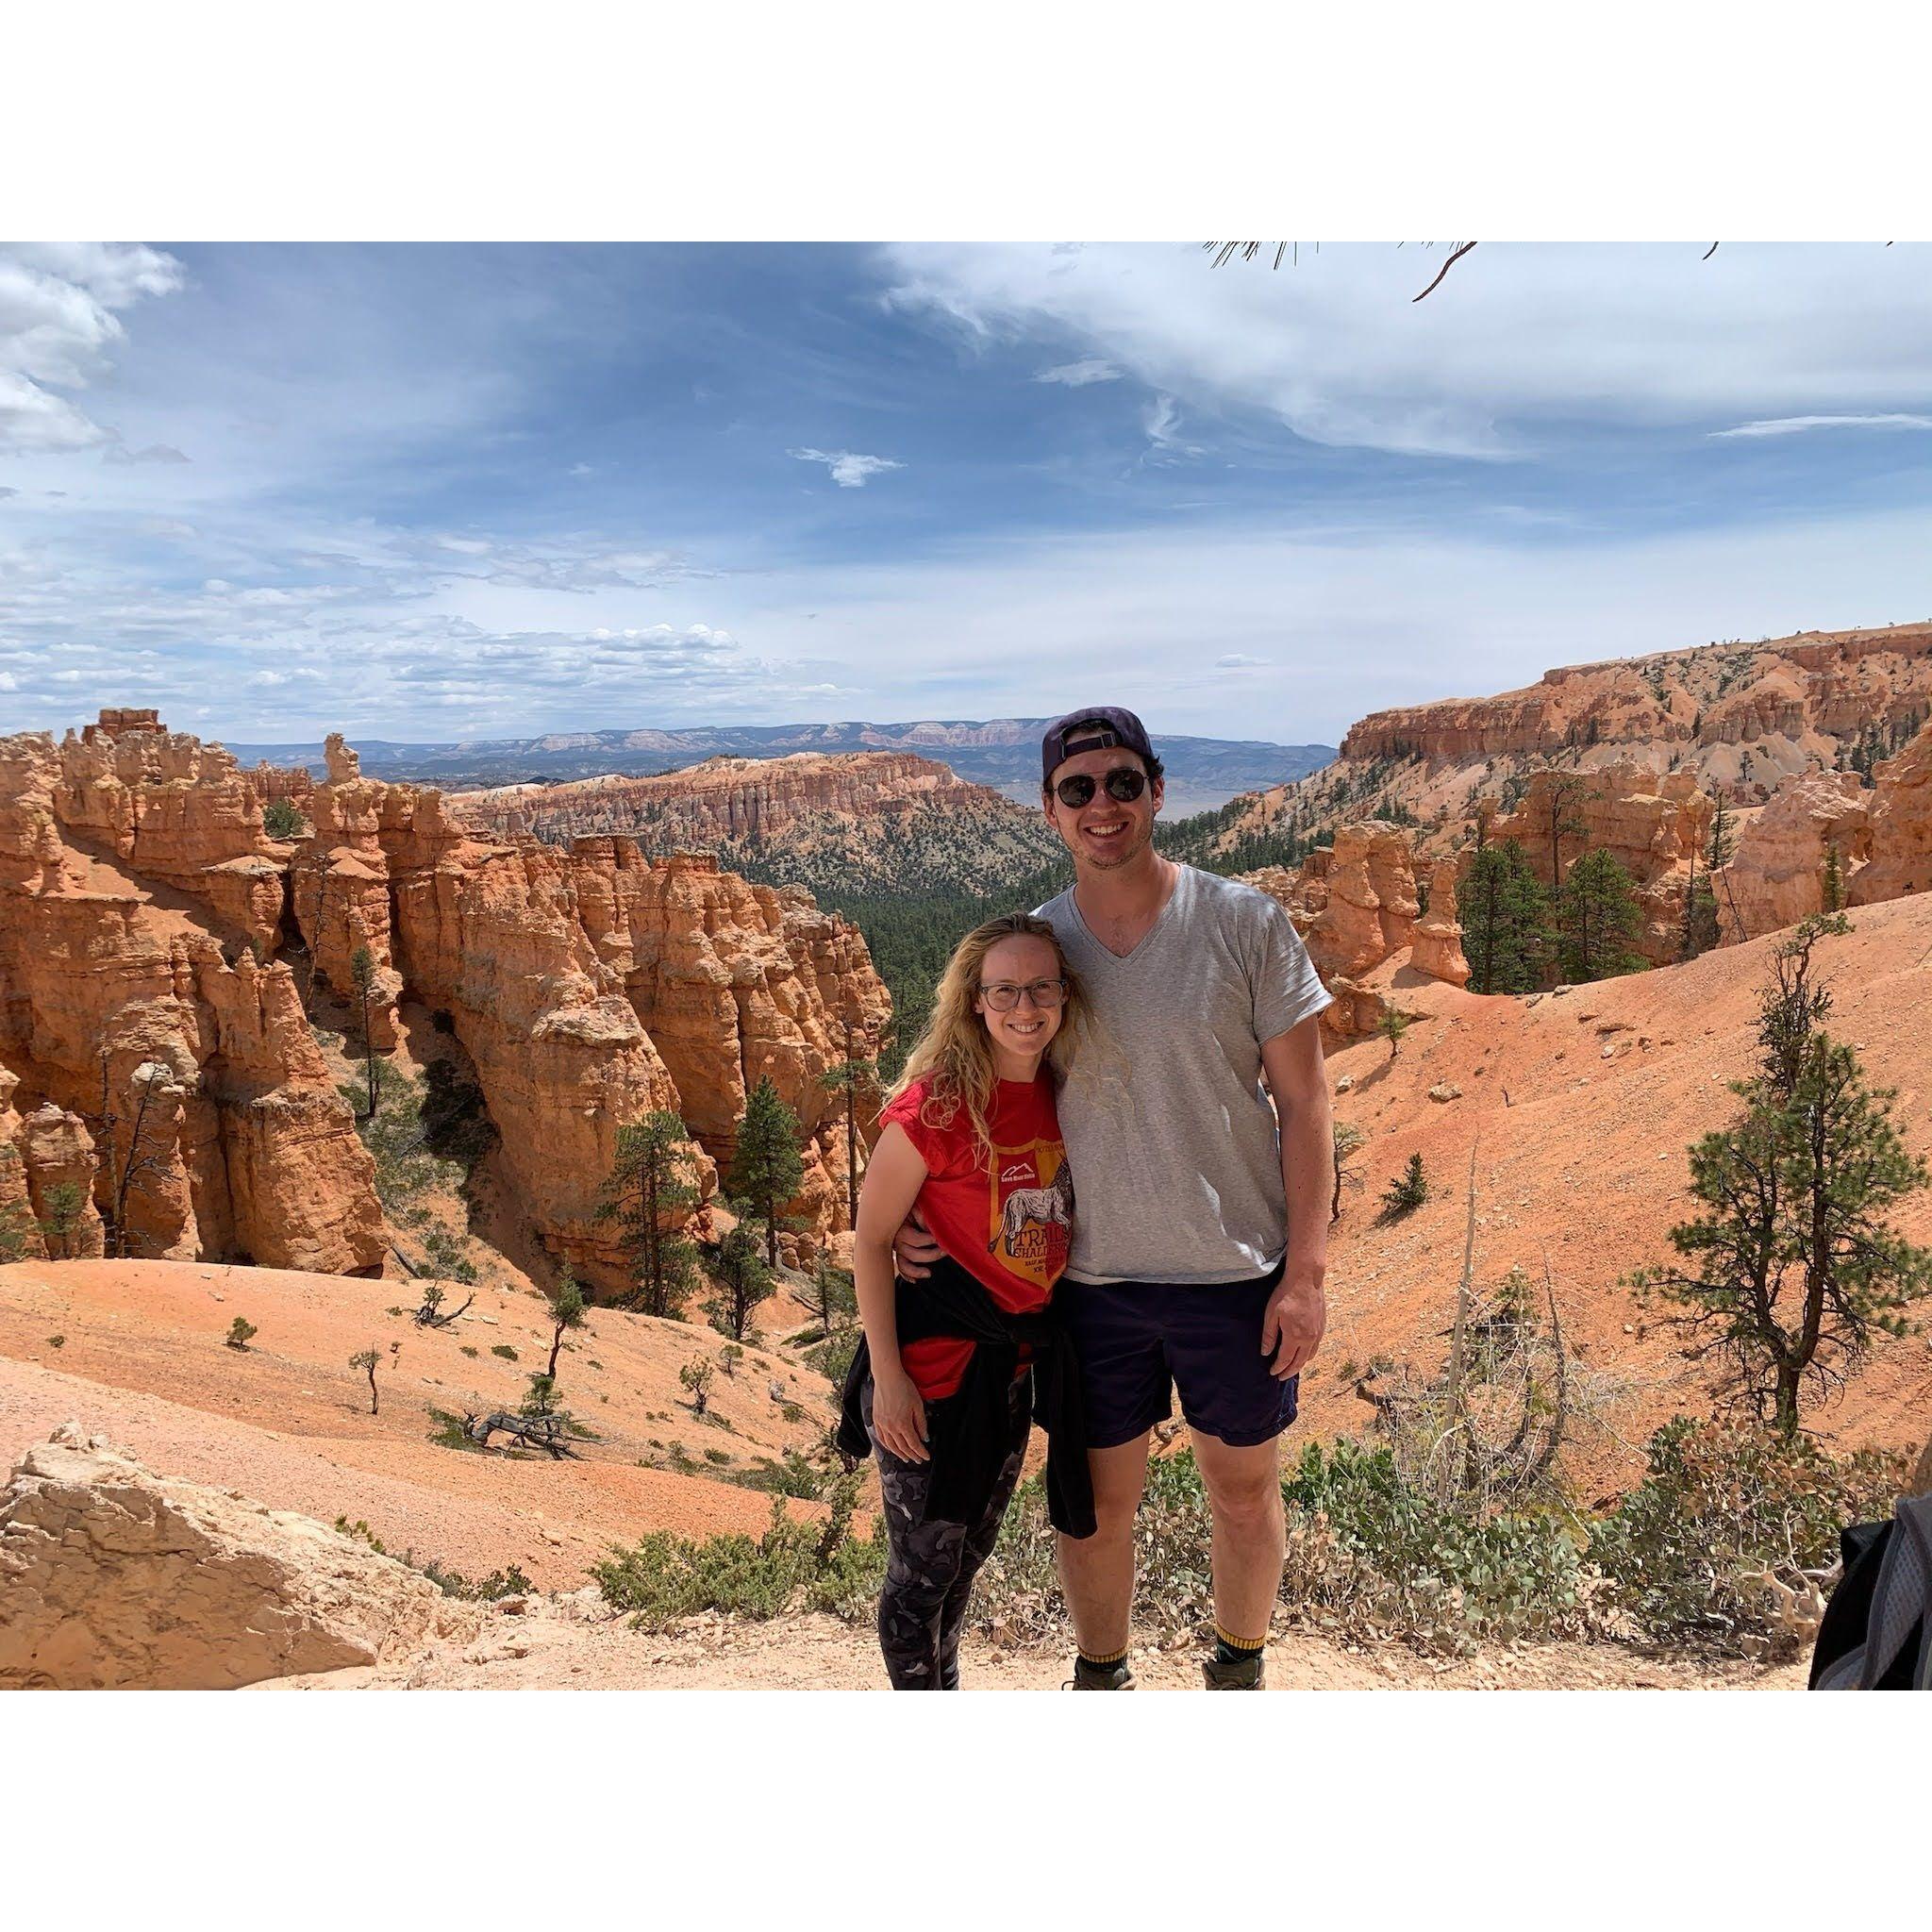 We were in awe of Bryce canyon, and Savyon loved learning about the geographical features of all the HOODOOS!